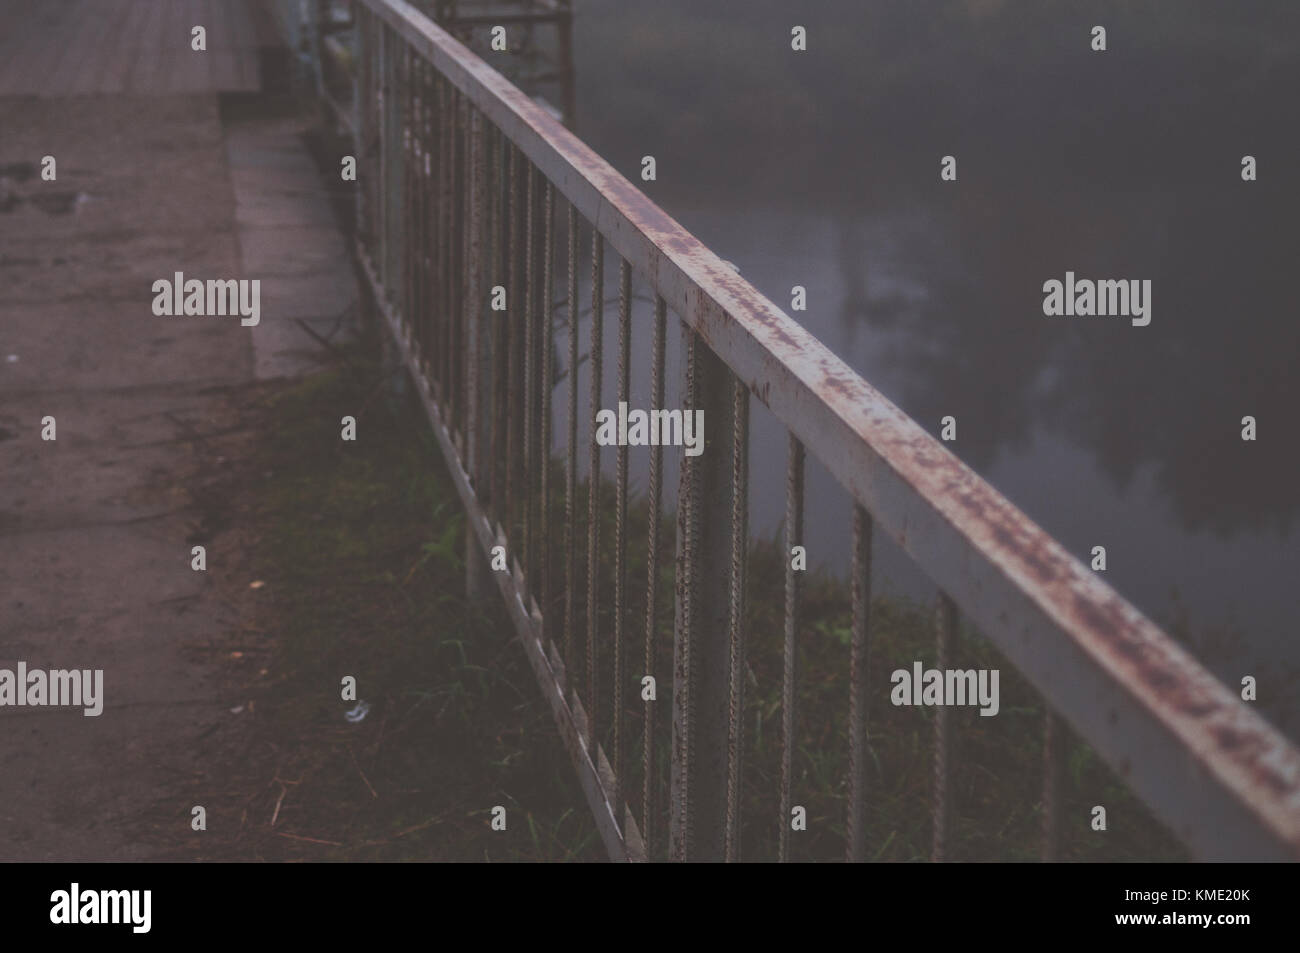 Railing constructions. Bridge over the river in misty morning. Stock Photo